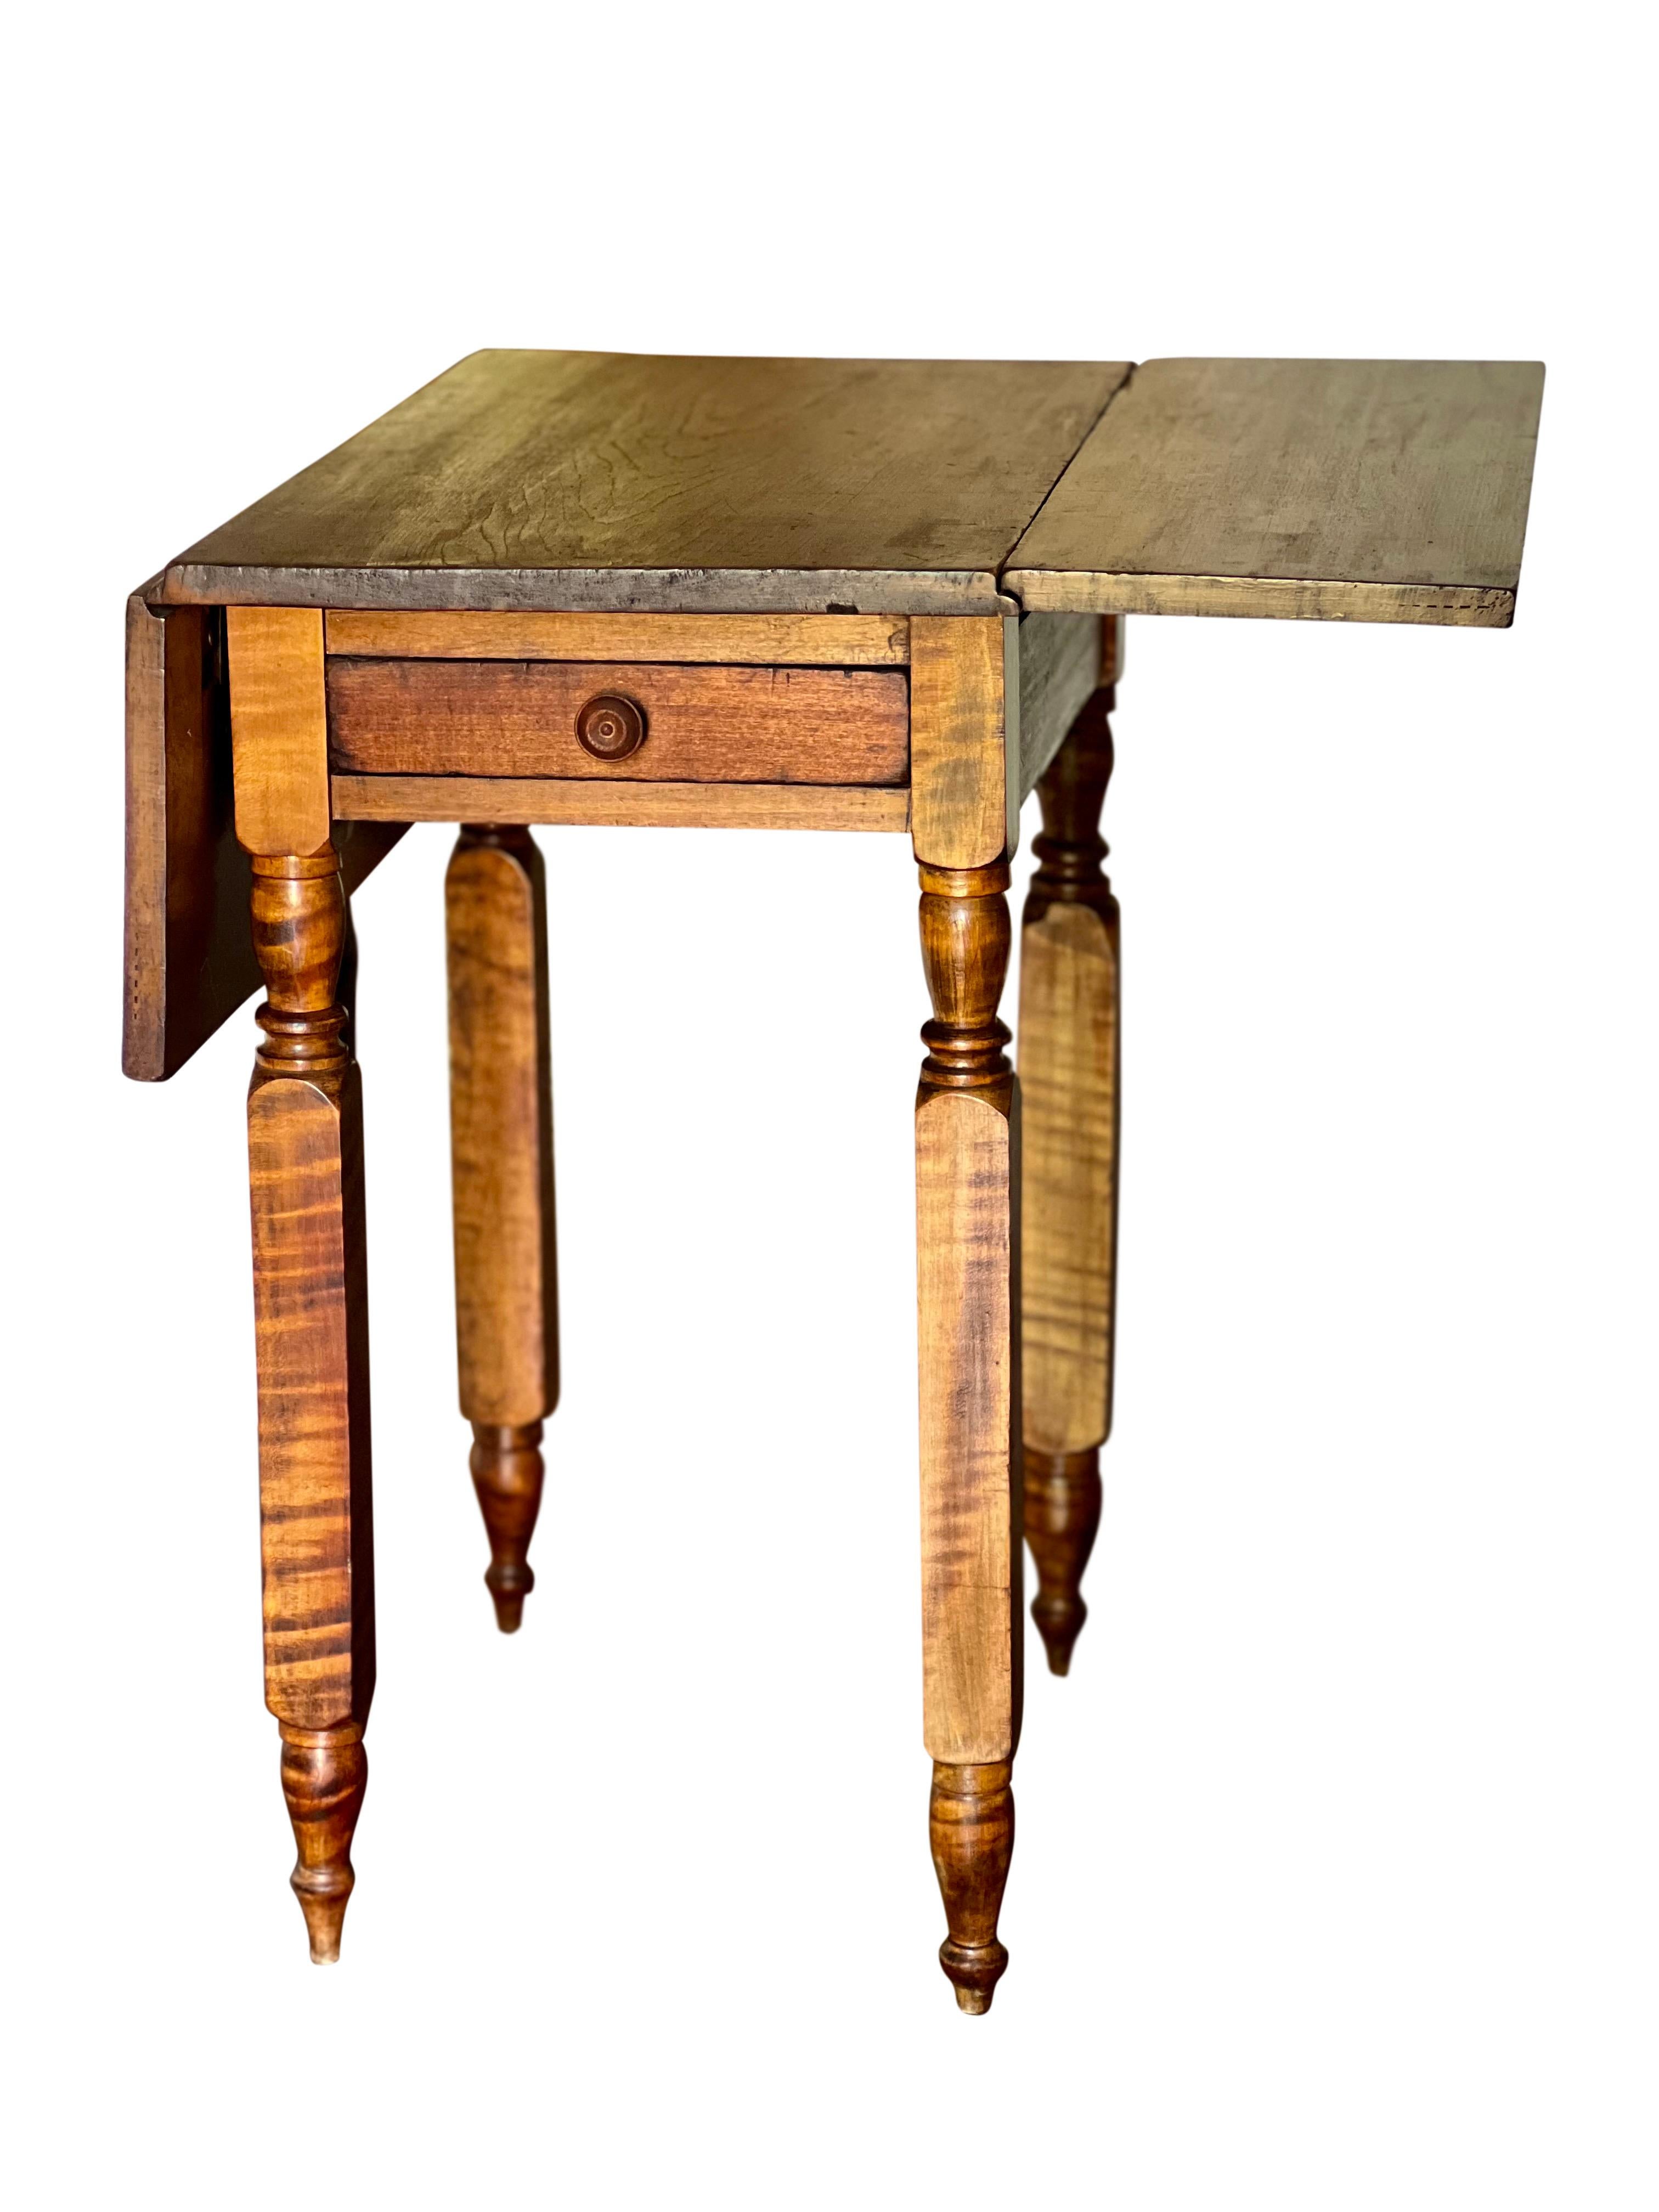 French Provincial walnut drop-leaf harvest table, France, c. 1890.

A charming table handcrafted in a French farmhouse barn workshop. It features a single dovetail drawer with matching walnut knob and hand turned legs. Two leaves fully extend the